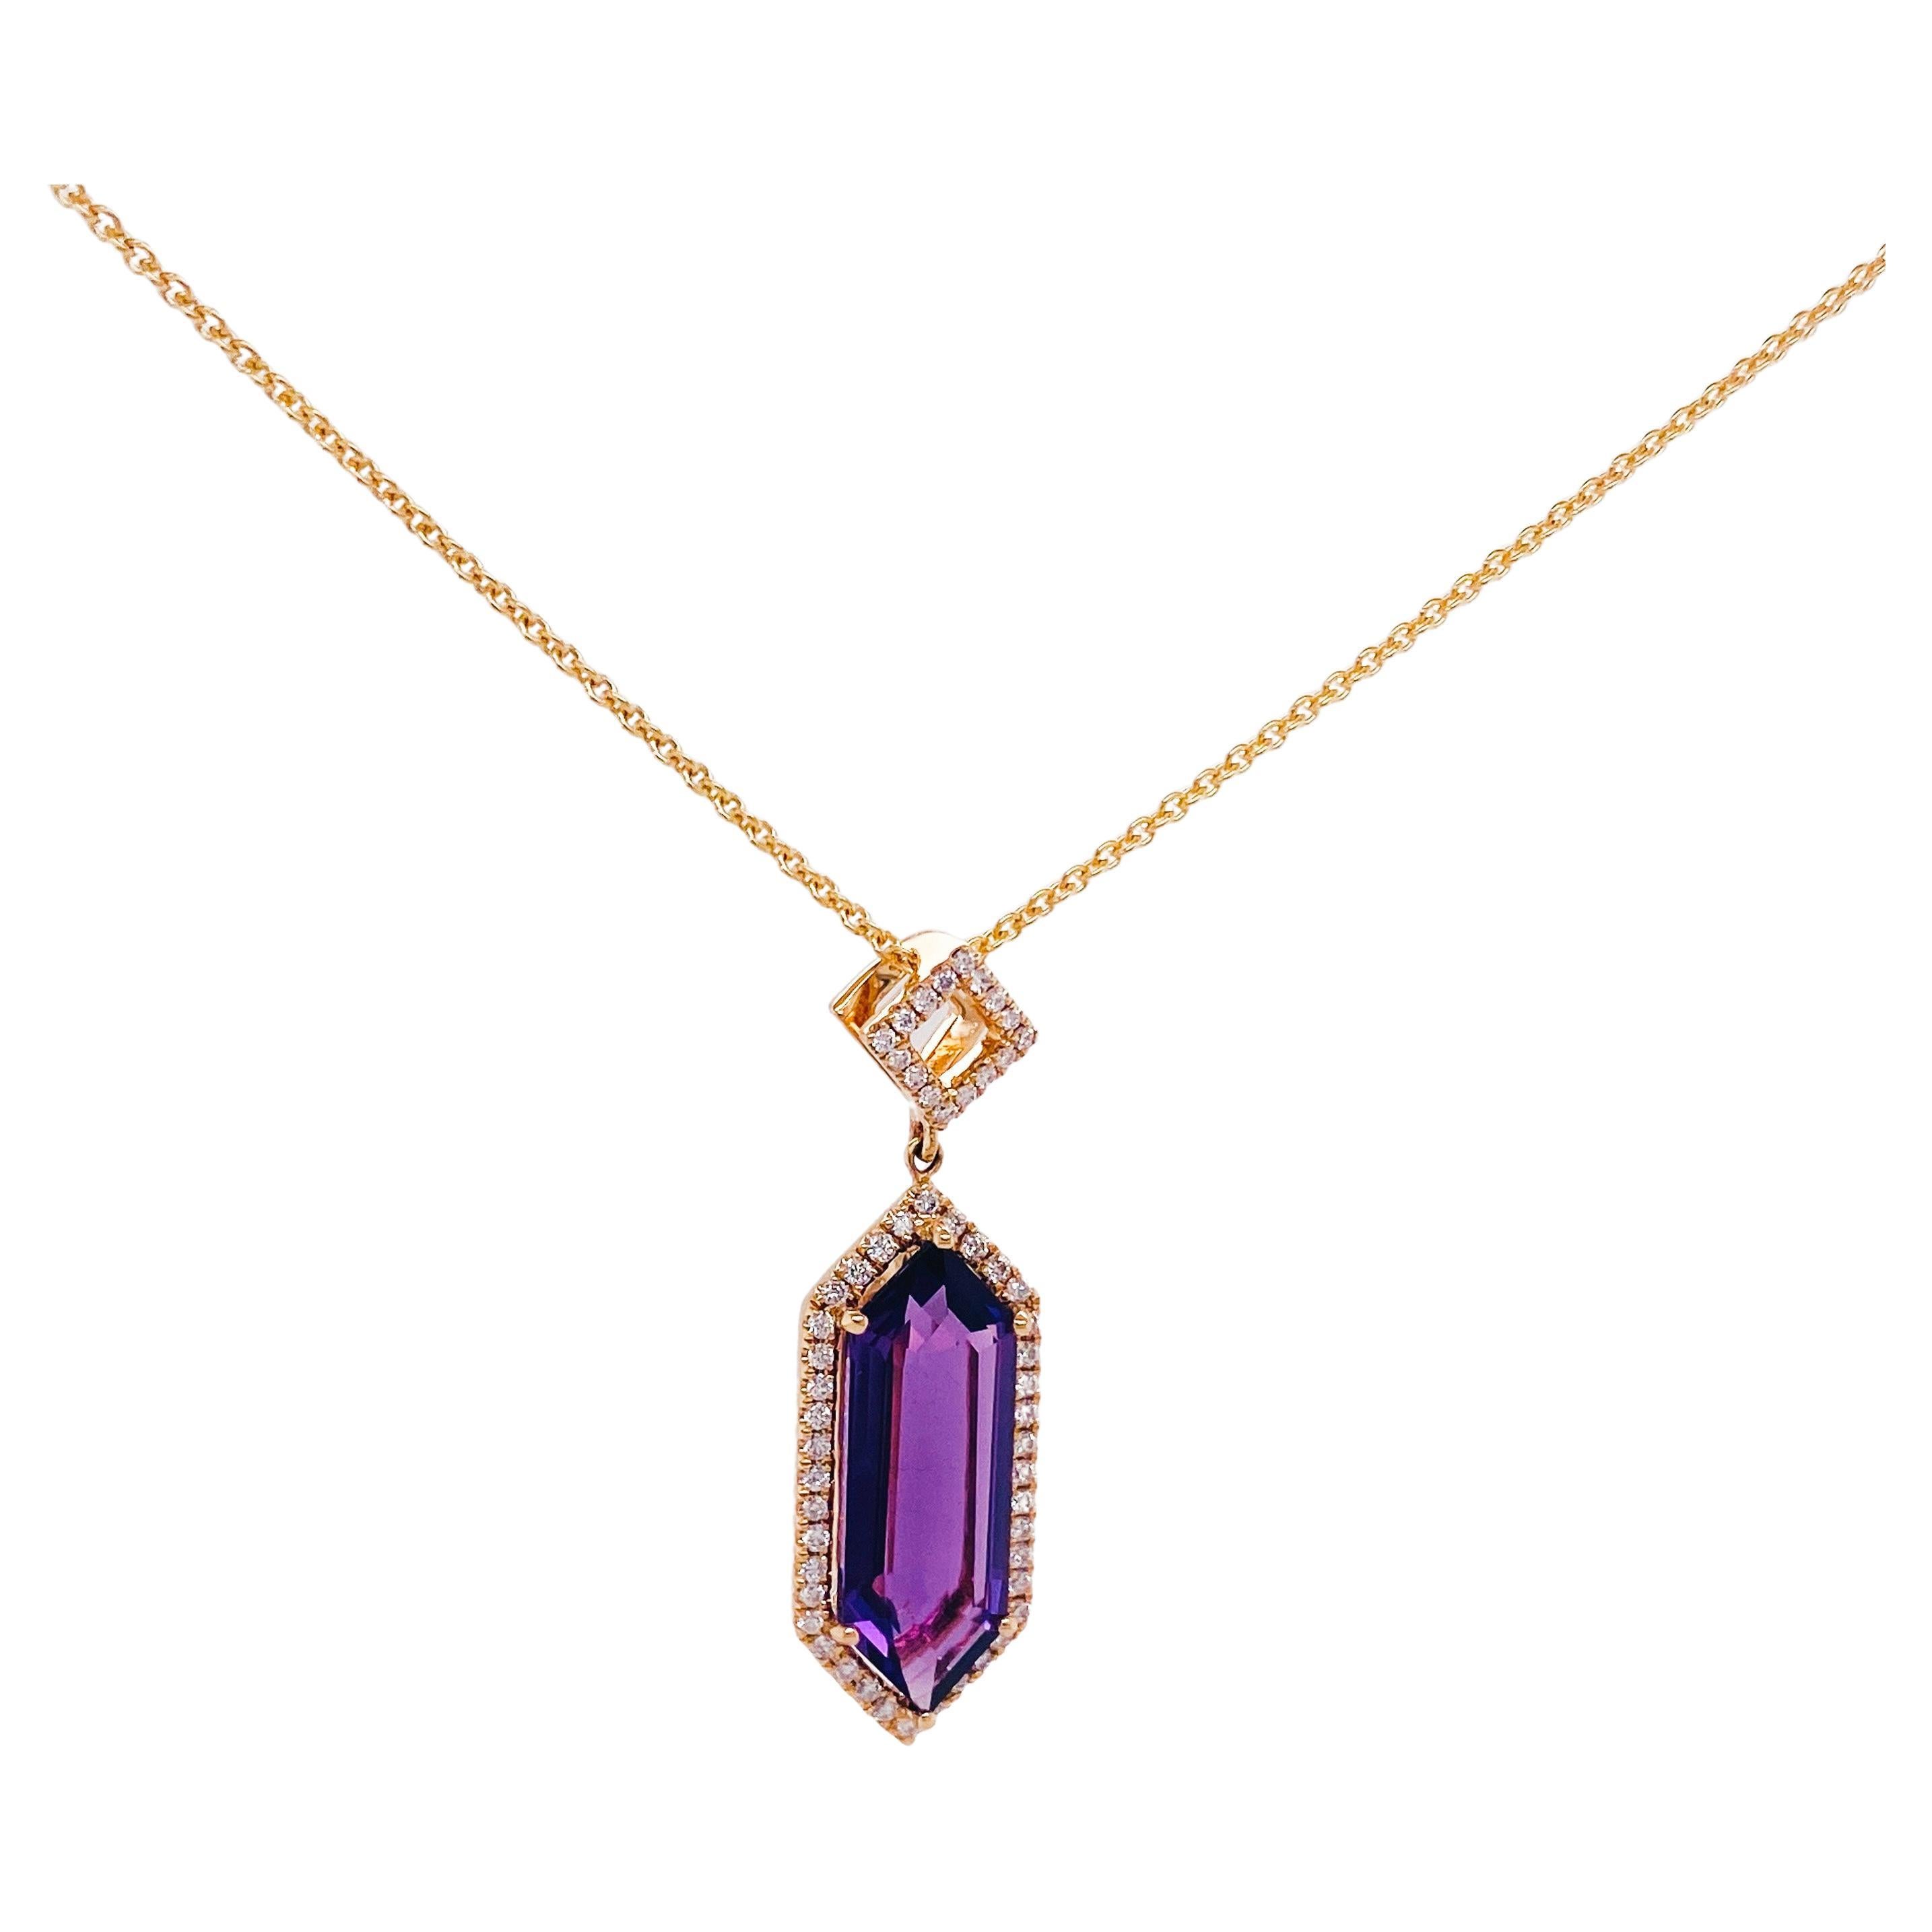 Hexagonal Amethyst Pendant with Diamond Halo 3.75 Carat and Chain in 14k Gold For Sale